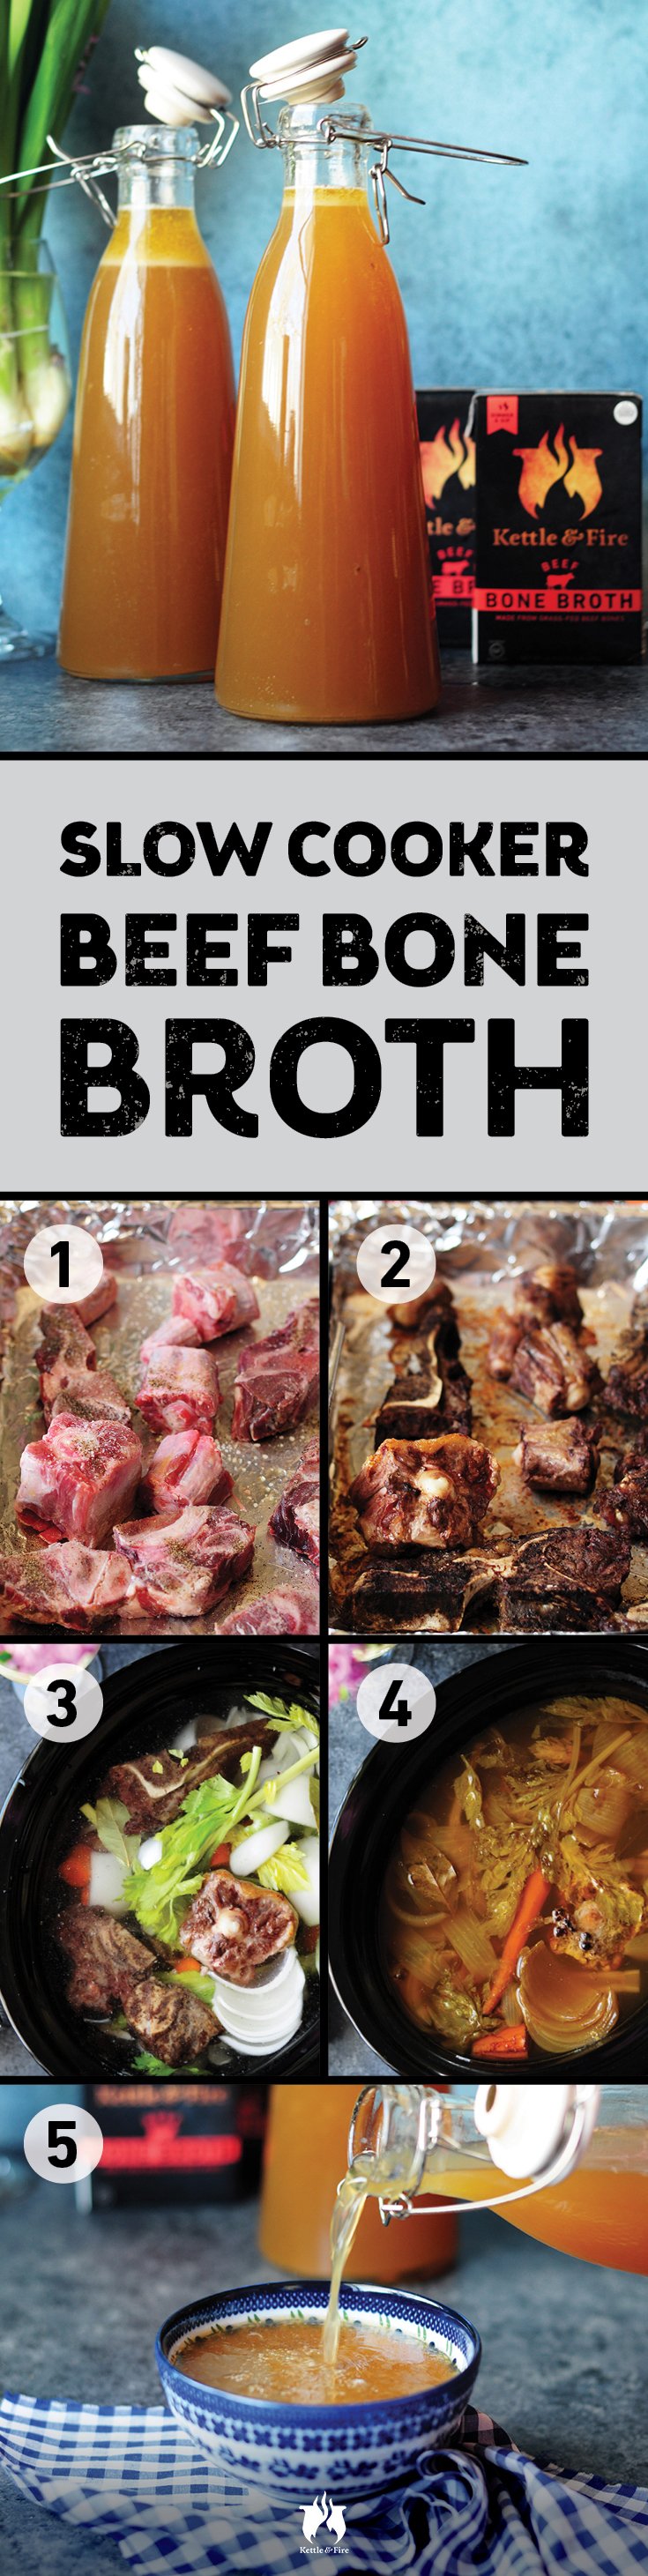 Here’s Kettle & Fire tried and true slow cooker beef bone broth recipe using high-quality, grass-fed bones for the ultimate nutrient-rich bone broth.